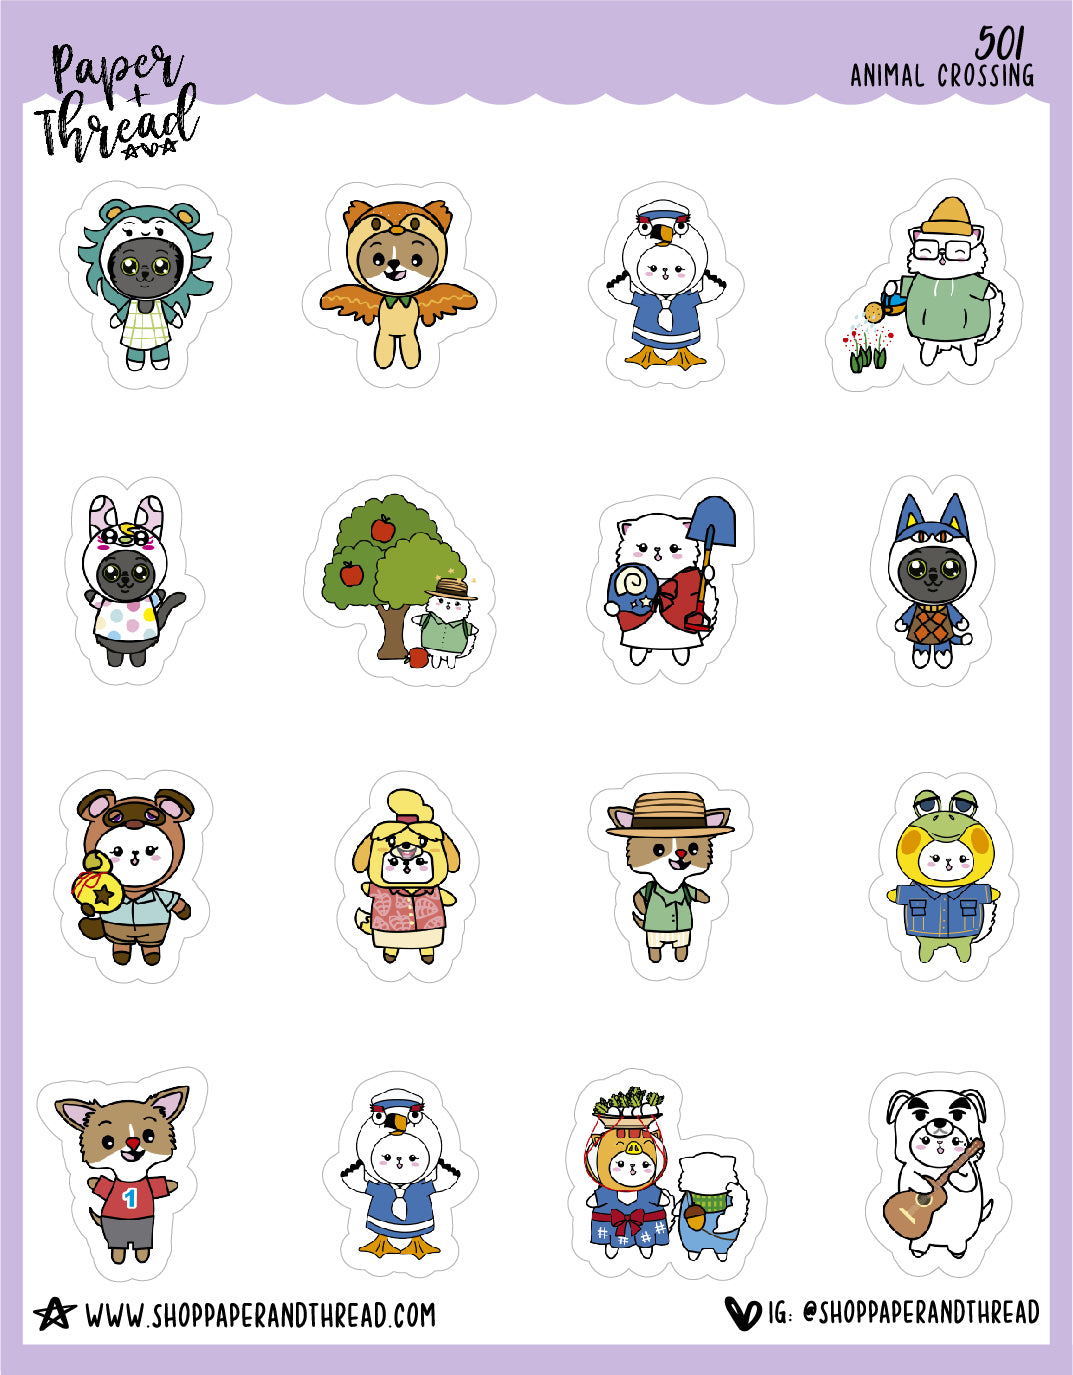 Animal Game Planner Stickers - Snowball The Cat - [501]